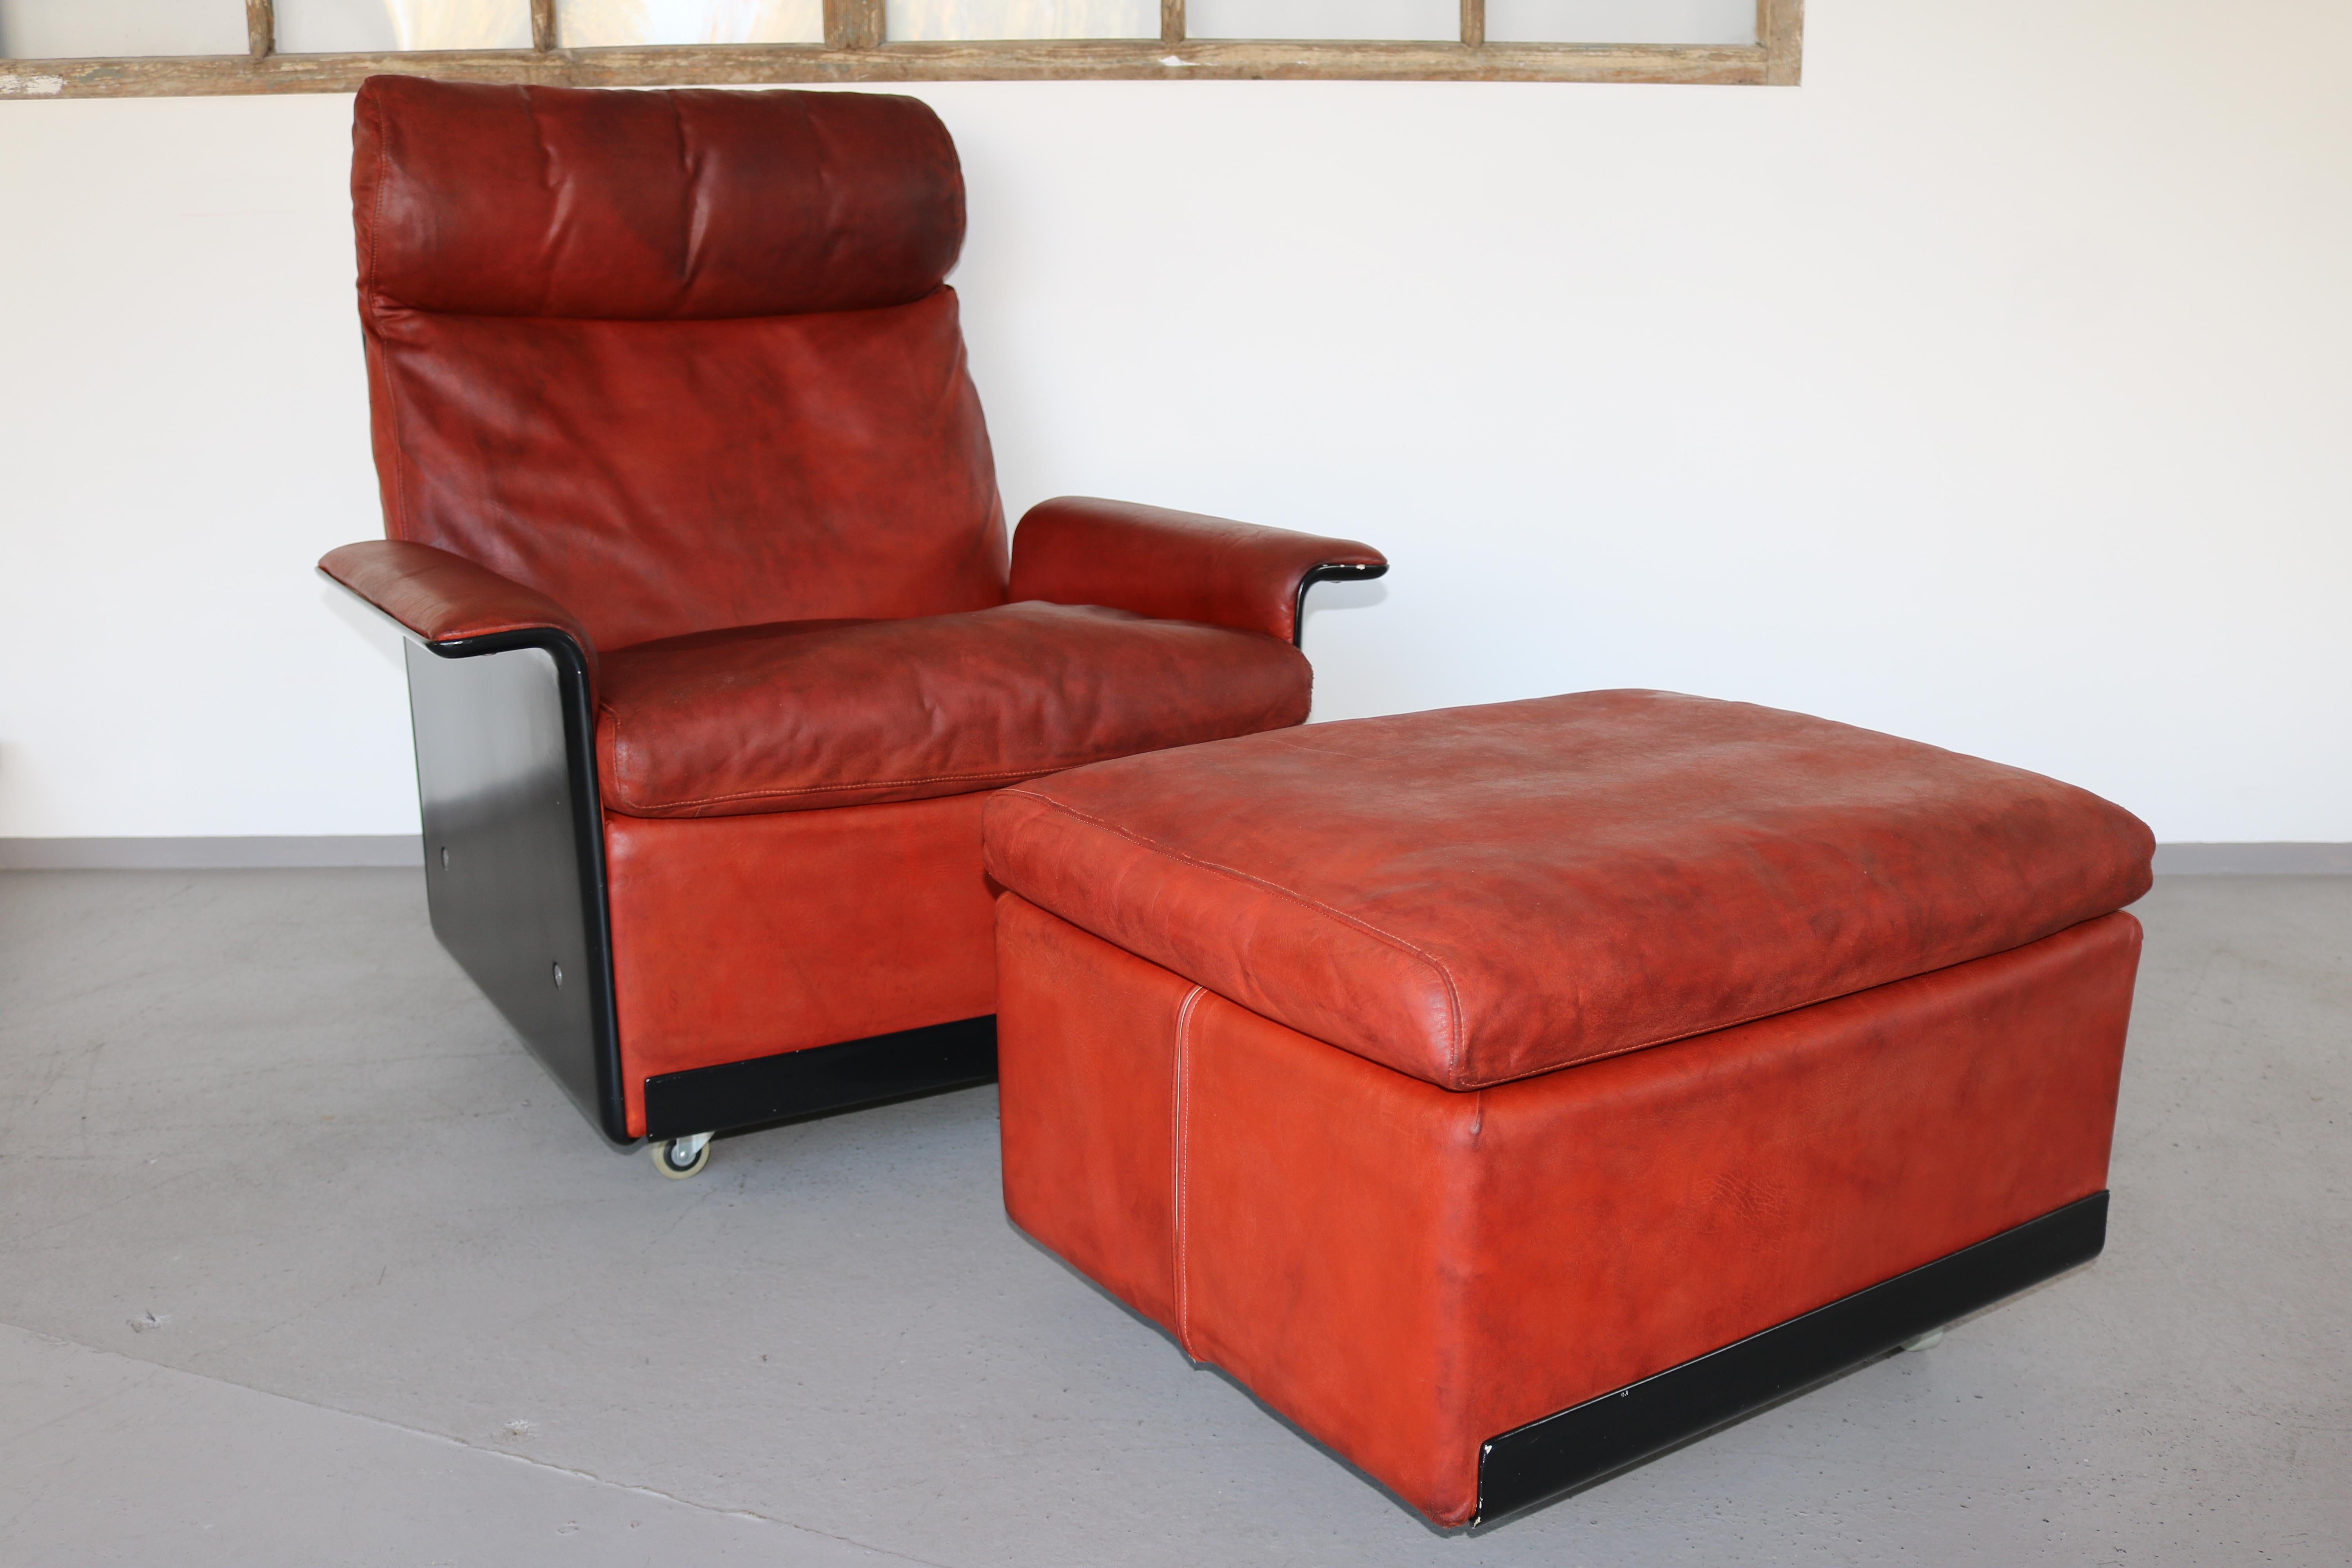 The extremely comfortable 620 high back chair by Dieter Rams for Vitsoe with ottoman.
The shell is in black and the leather in rusty red. The armchair and the stool are on wheels.
The leather has good patina, but no holes or cracks. It was